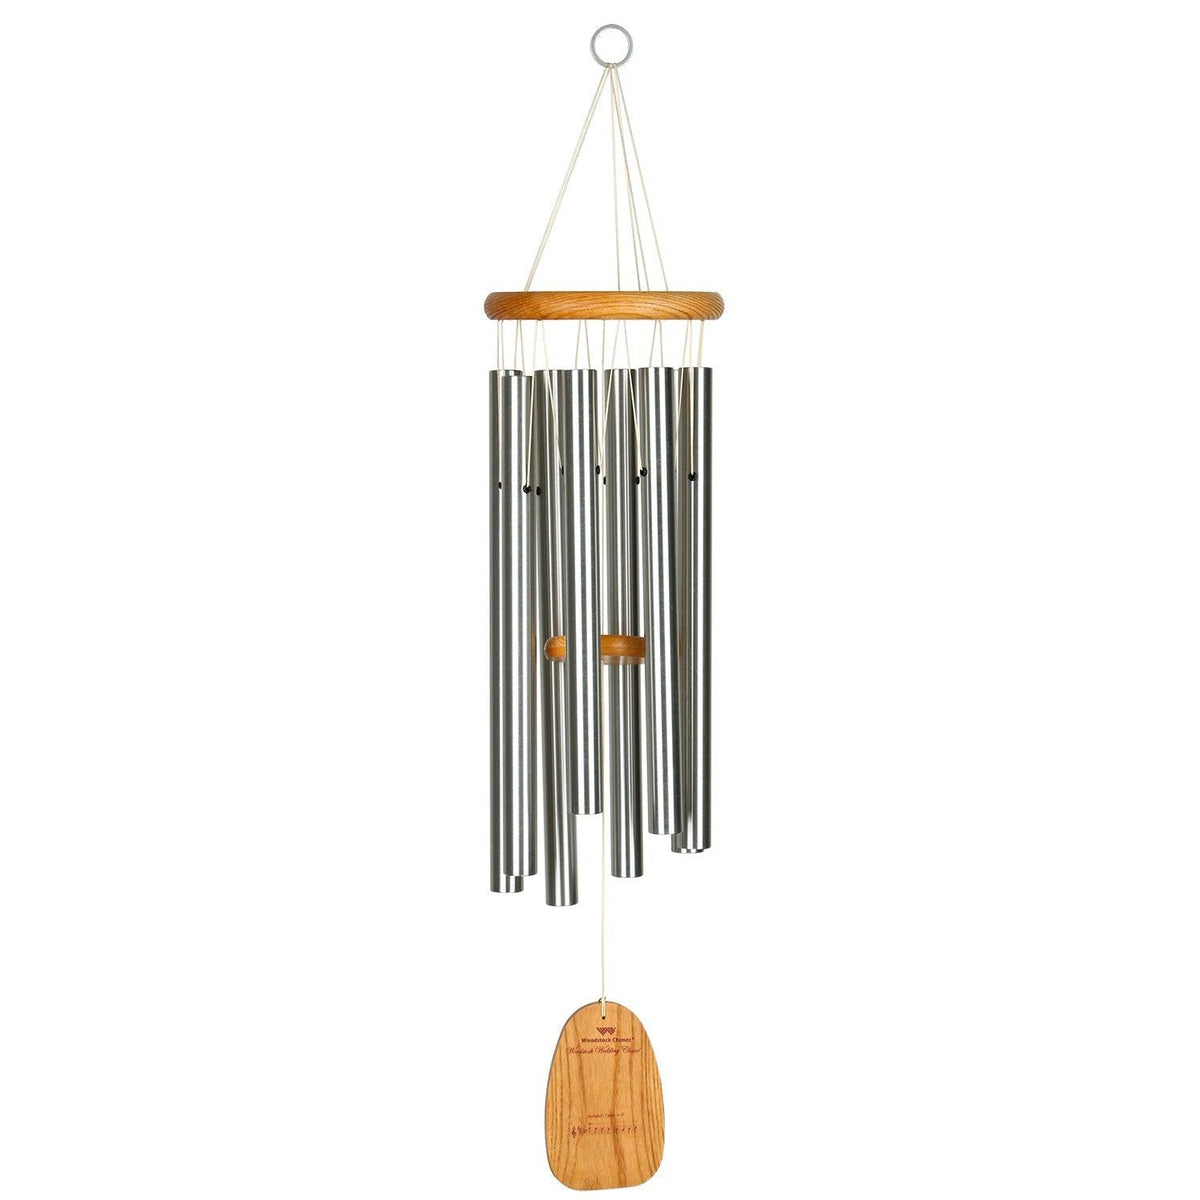 Create a beautiful, harmonious ambiance on your special day with timeless and elegant notes. This wind chime is crafted from high-quality cherry finish ash wood and features eight silver aluminum tubes, producing rich and resonant tones. Measuring at 34 inches in length and 7 inches in diameter, it&#39;s the perfect size to fit in any outdoor space.